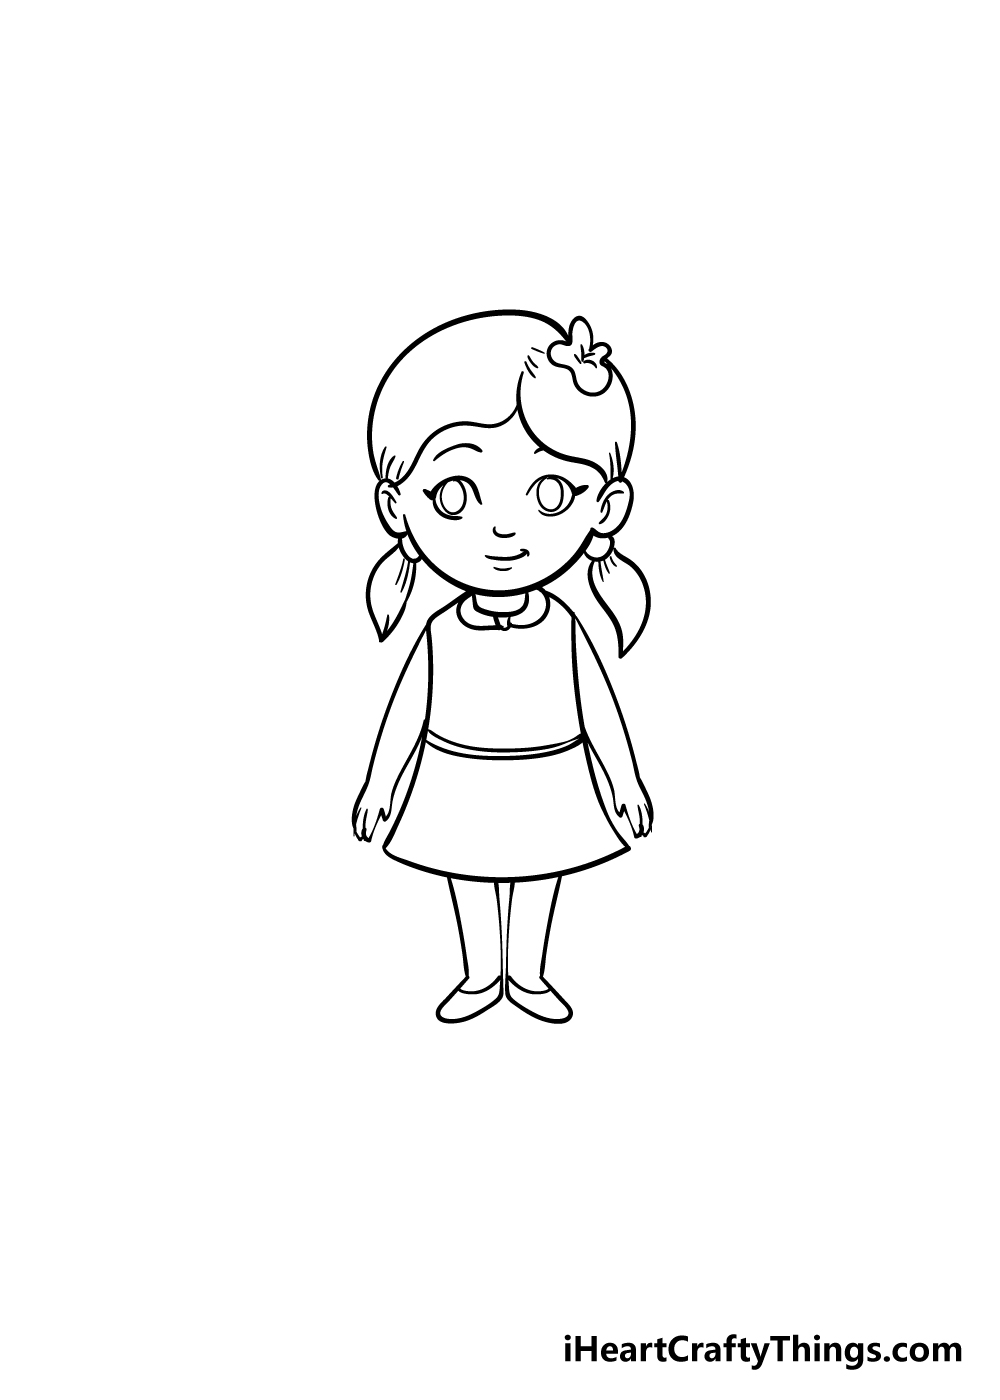 Cartoon Girl Drawing - How To Draw A Cartoon Girl Step By Step